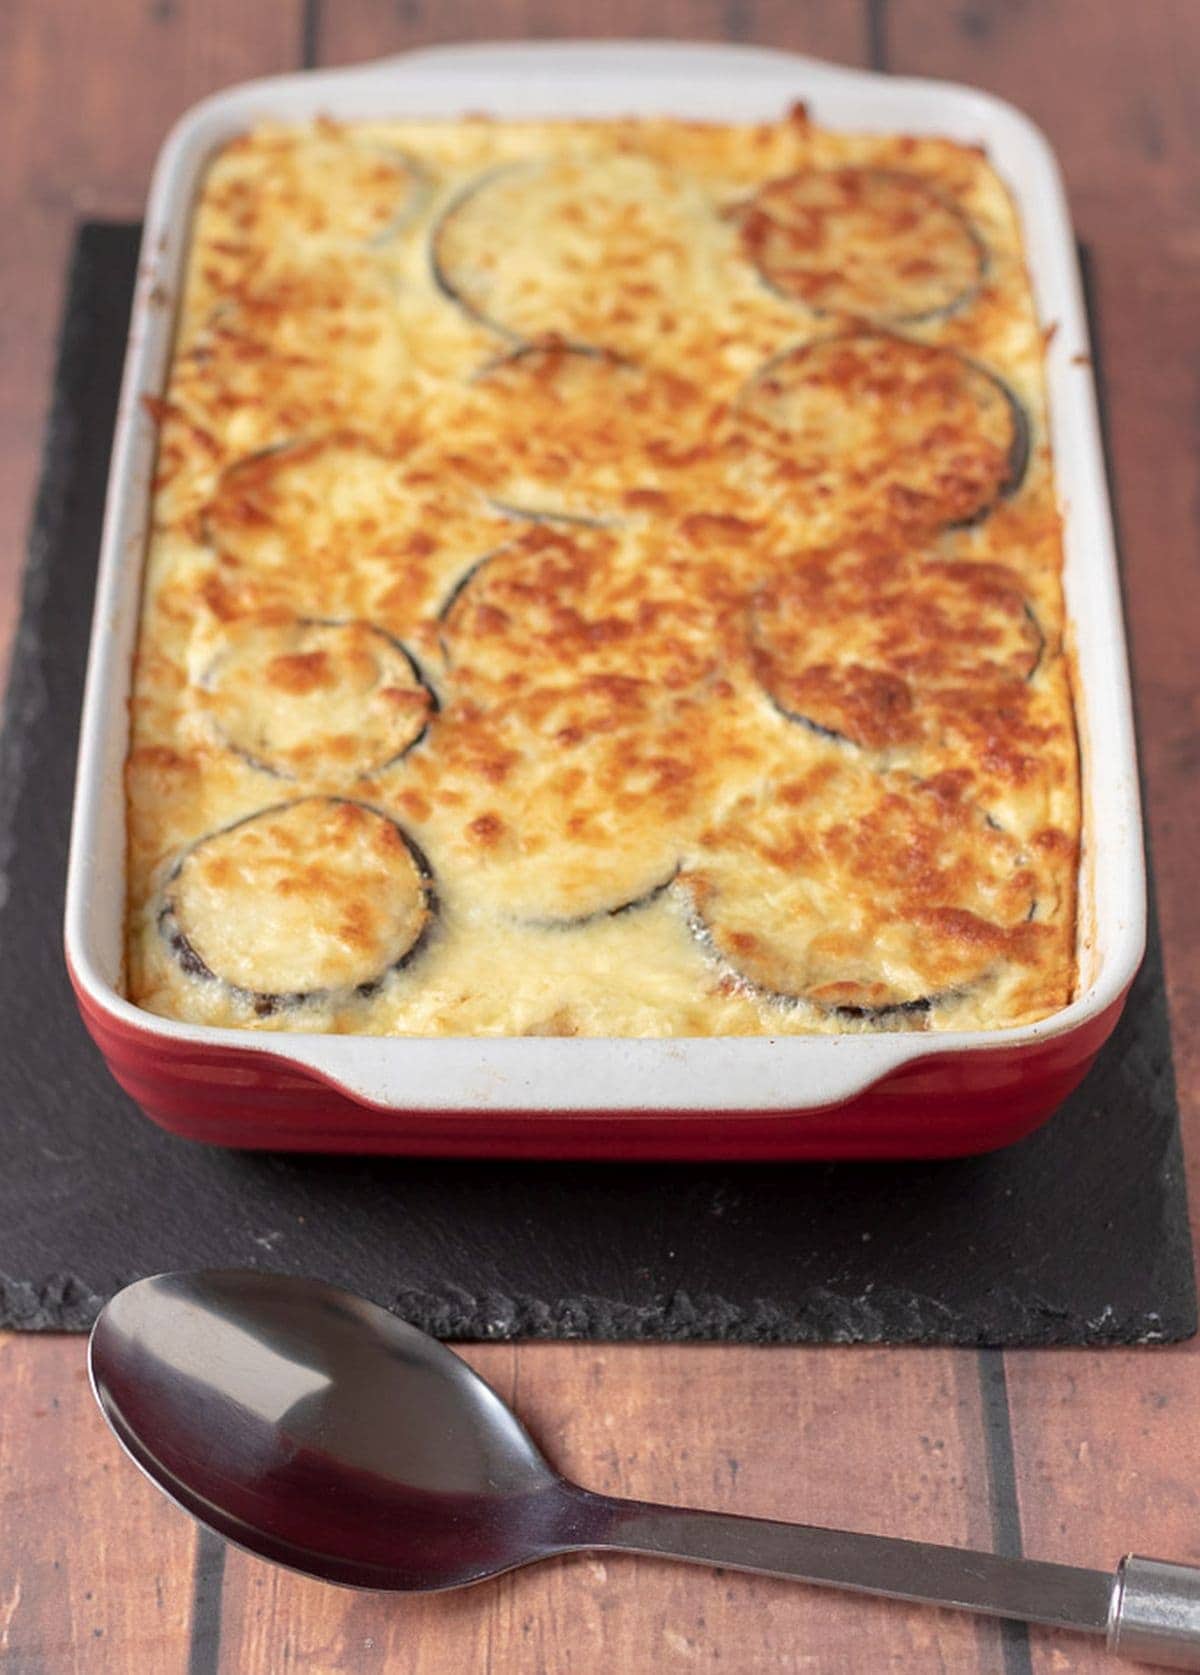 Delicious healthier Moussaka just taken out of the oven and cooling before being carved up and served.